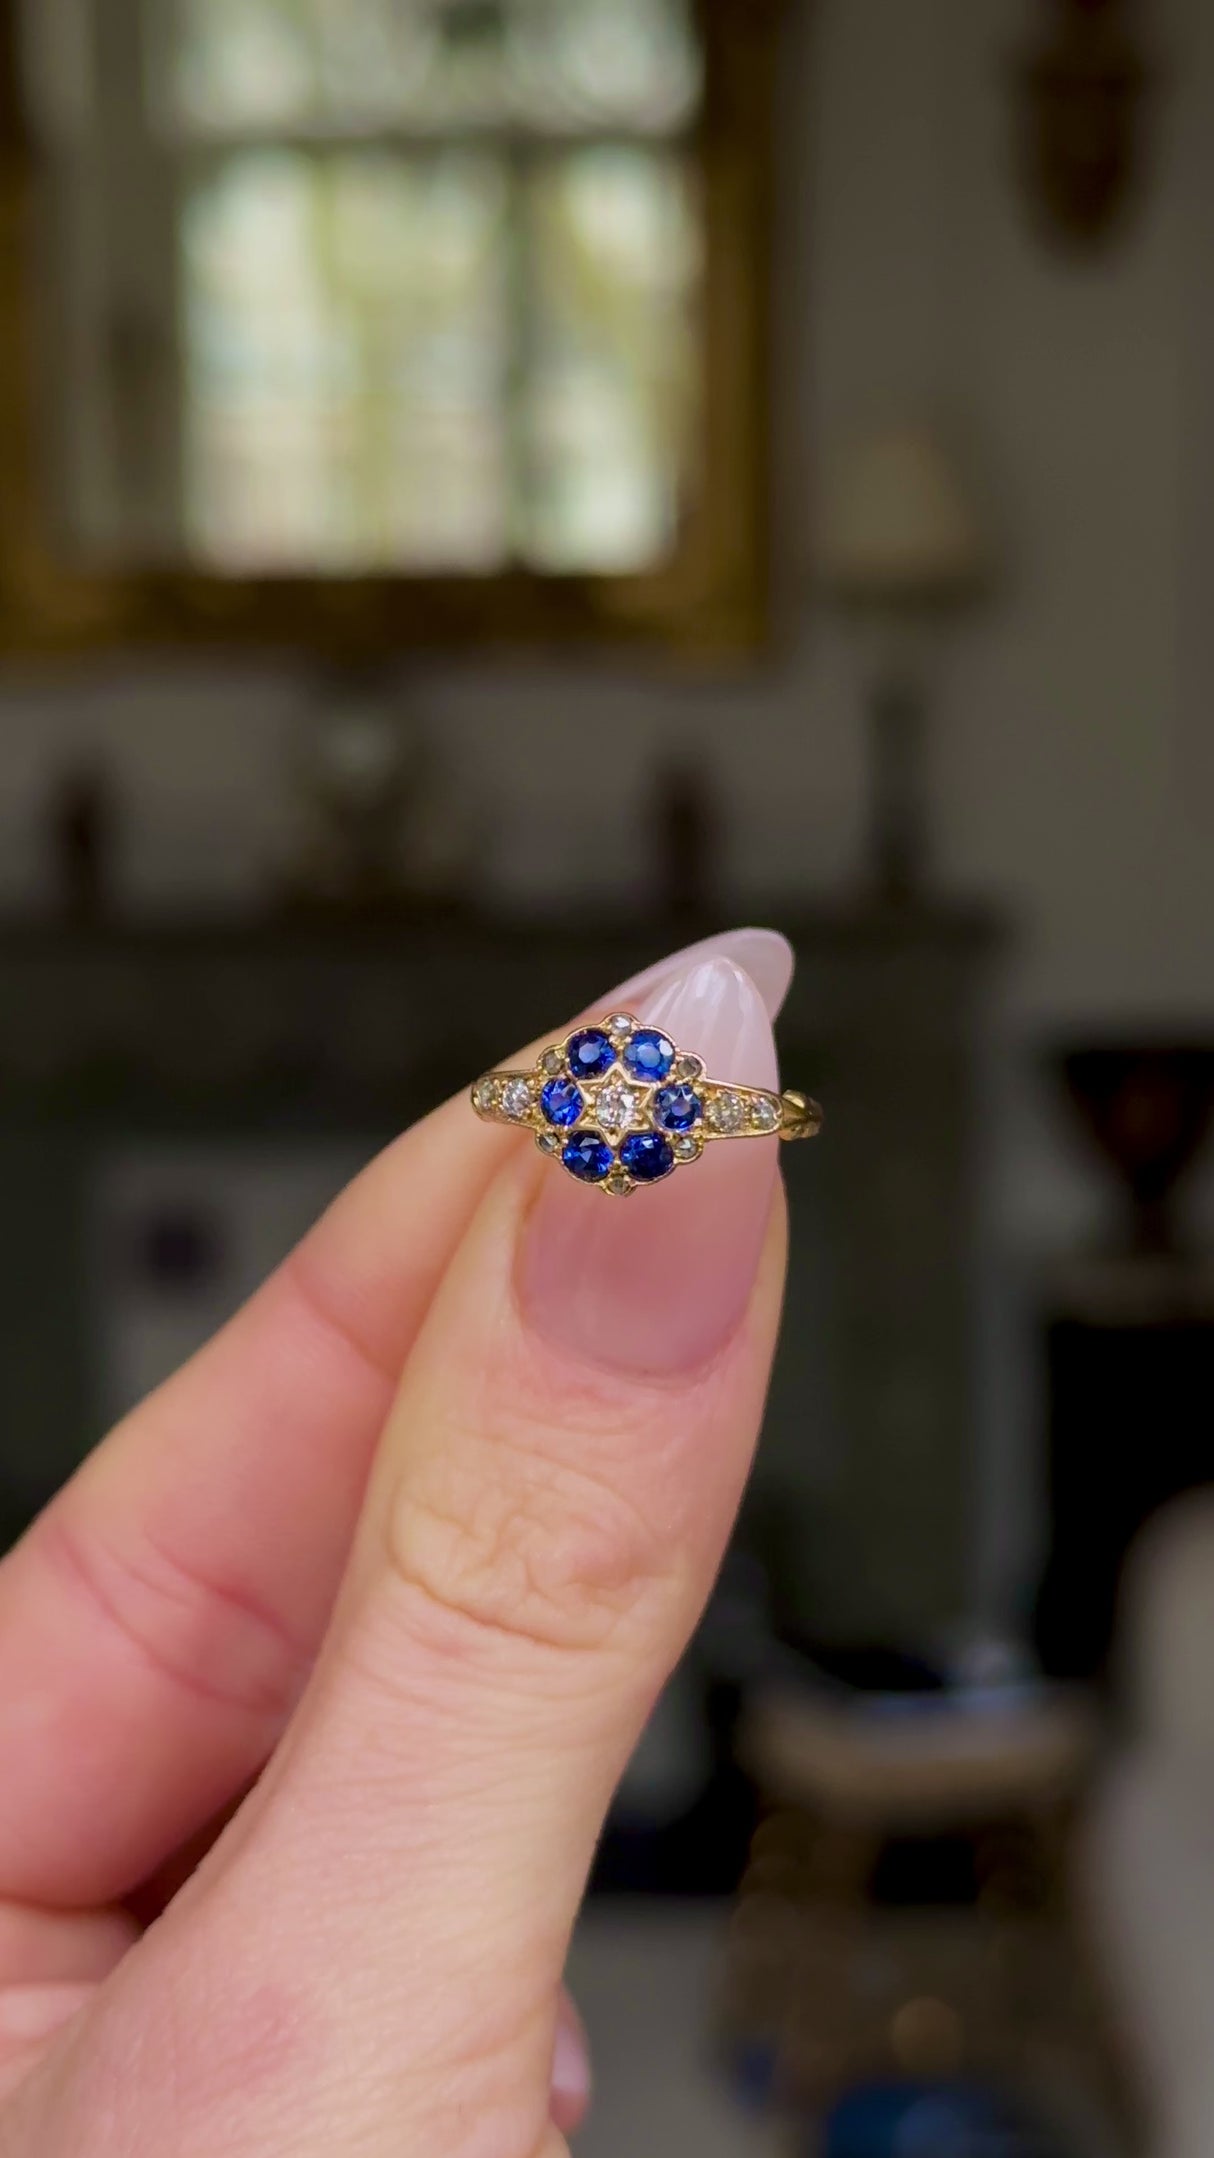 Antique, Edwardian Sapphire and Diamond Cluster Ring,  held in fingers and moved around to give perspective.